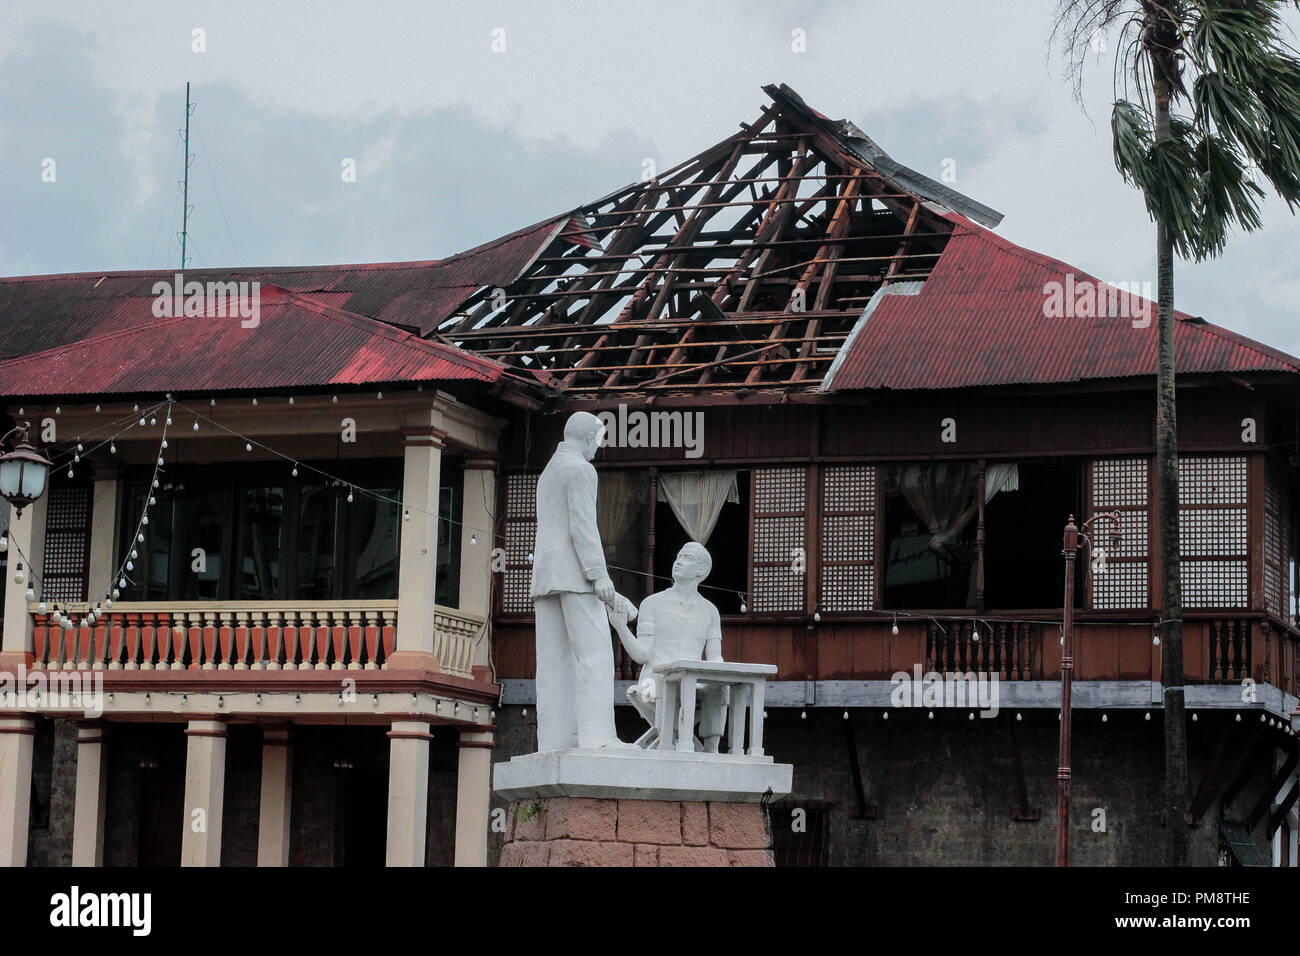 The roof of Kapitan Moy,a 200-year-old house of Don Laureano Guevarra, got flown away the by strong wind brought by the tornado. The accident also happened while there was a wedding reception inside the house. On September 14 2018, Super Typhoon Mangkhut hit the Philippines with wind speed of 205 kilometers per hour (kph), and gusts reaching 255 kph.  More than a thousand of Filipino citizens all over the country have been affected. Forecasters have called the Manghut as one ofthe strongest typhoon this year. Mangkhut is the 15th storm to batter the Philippines this year. Stock Photo